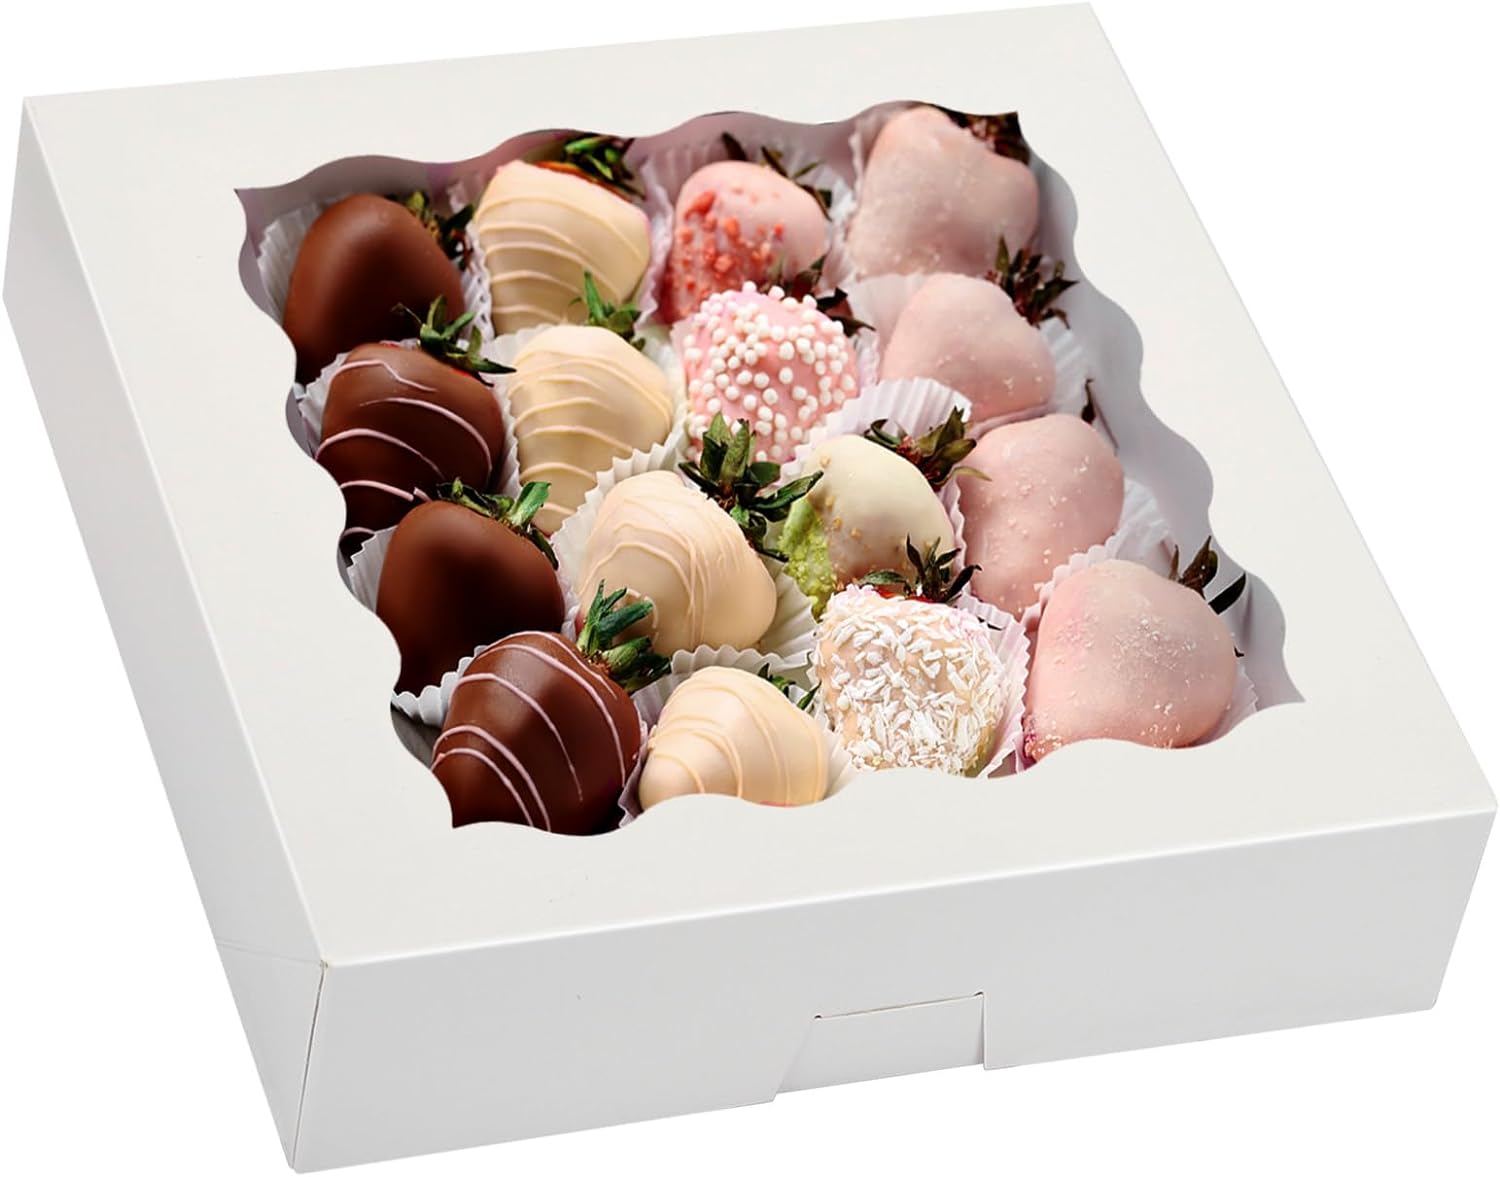 Moretoes 35pcs Bakery Boxes, 10x10x2.5 Inches Cookie Boxes with Window Pie Boxes for Cookies, Pastries, Pies, Chocolate Covered Strawberries, Valentine's Day (White)